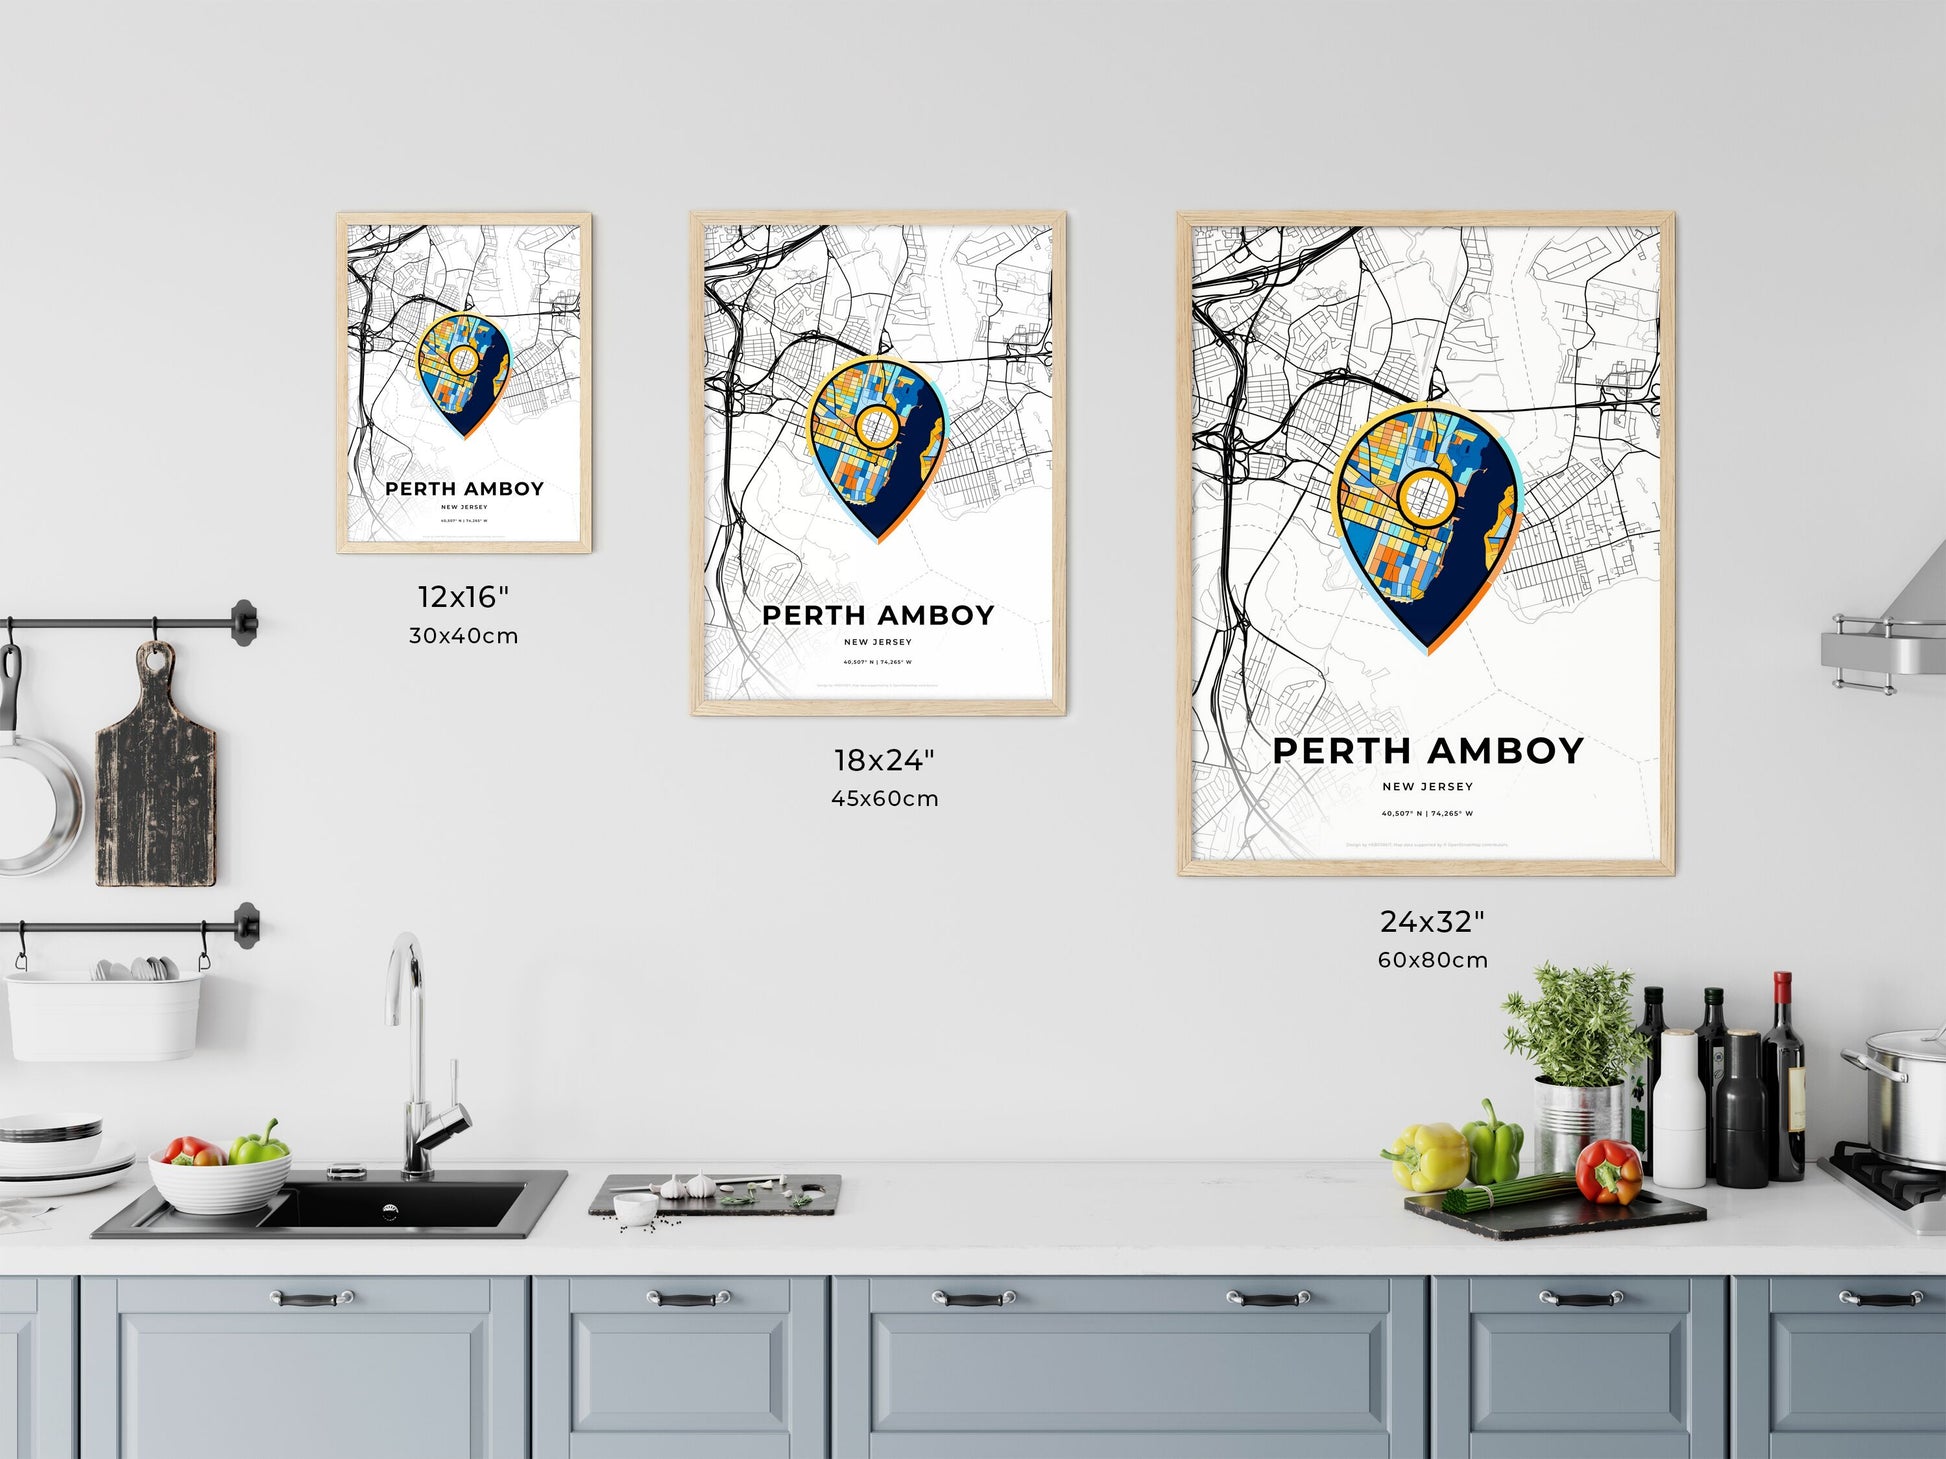 PERTH AMBOY NEW JERSEY minimal art map with a colorful icon.